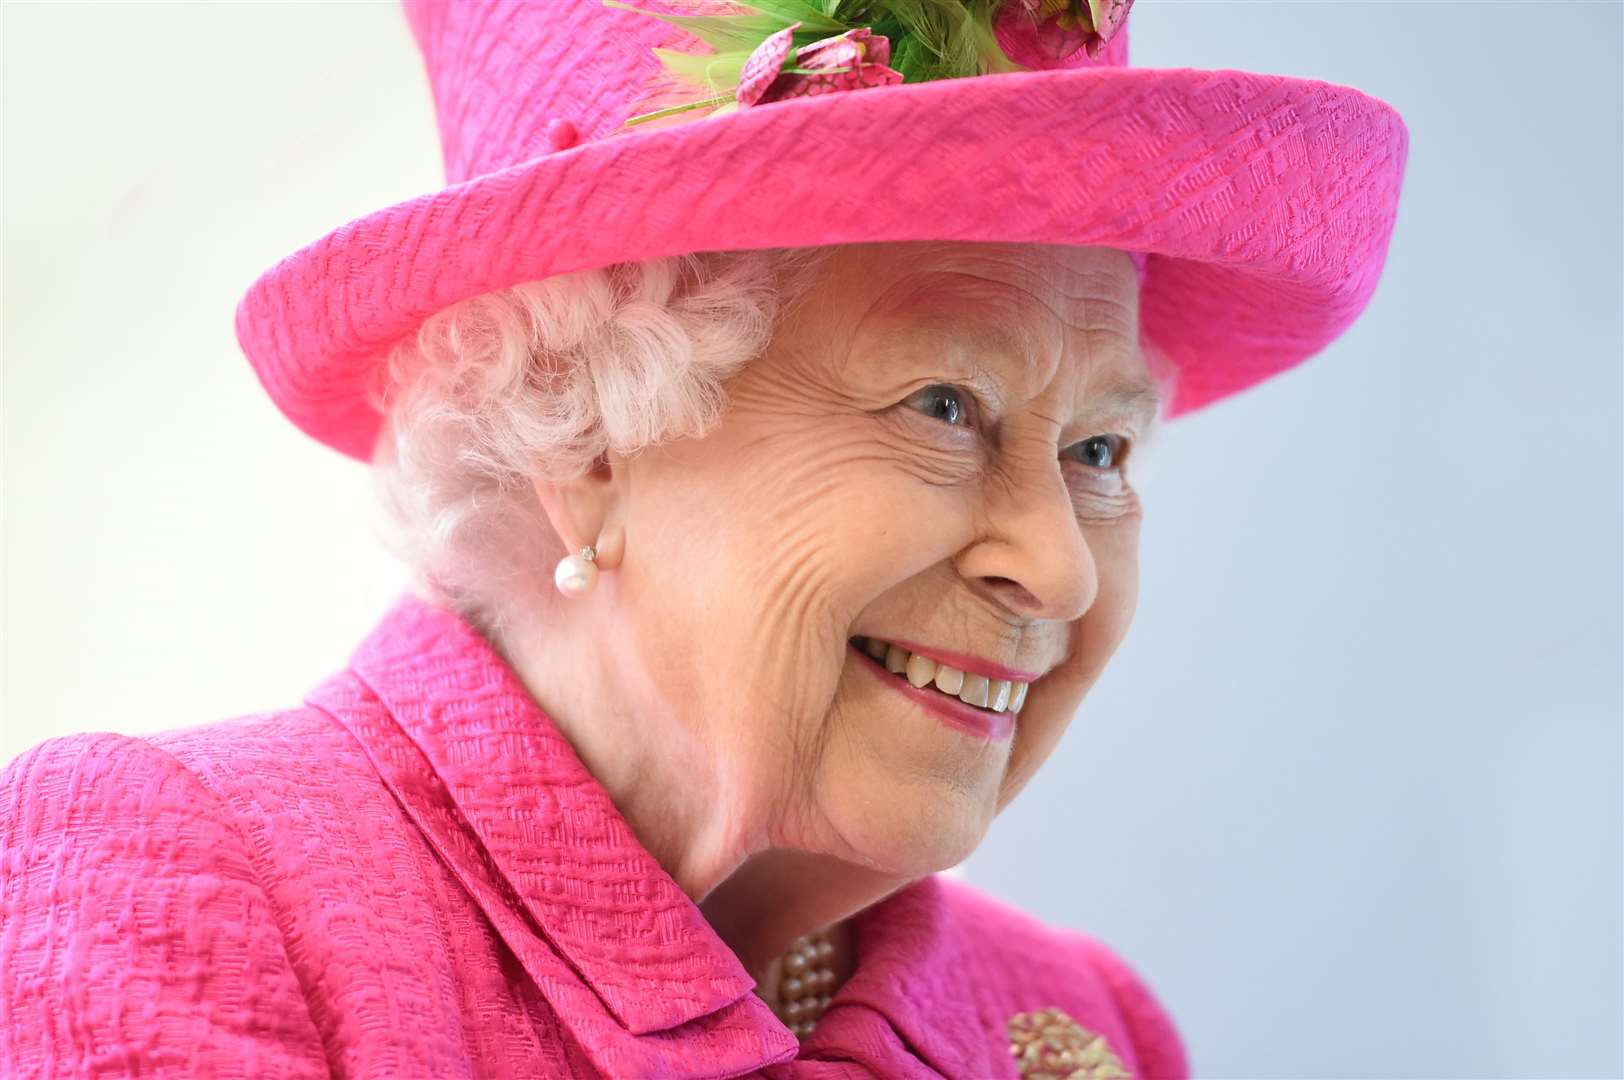 Queen Elizabeth II died peacefully at her Balmoral home aged 96 on September 8 last year, after serving as sovereign for 70 years (Joe Giddens/PA)